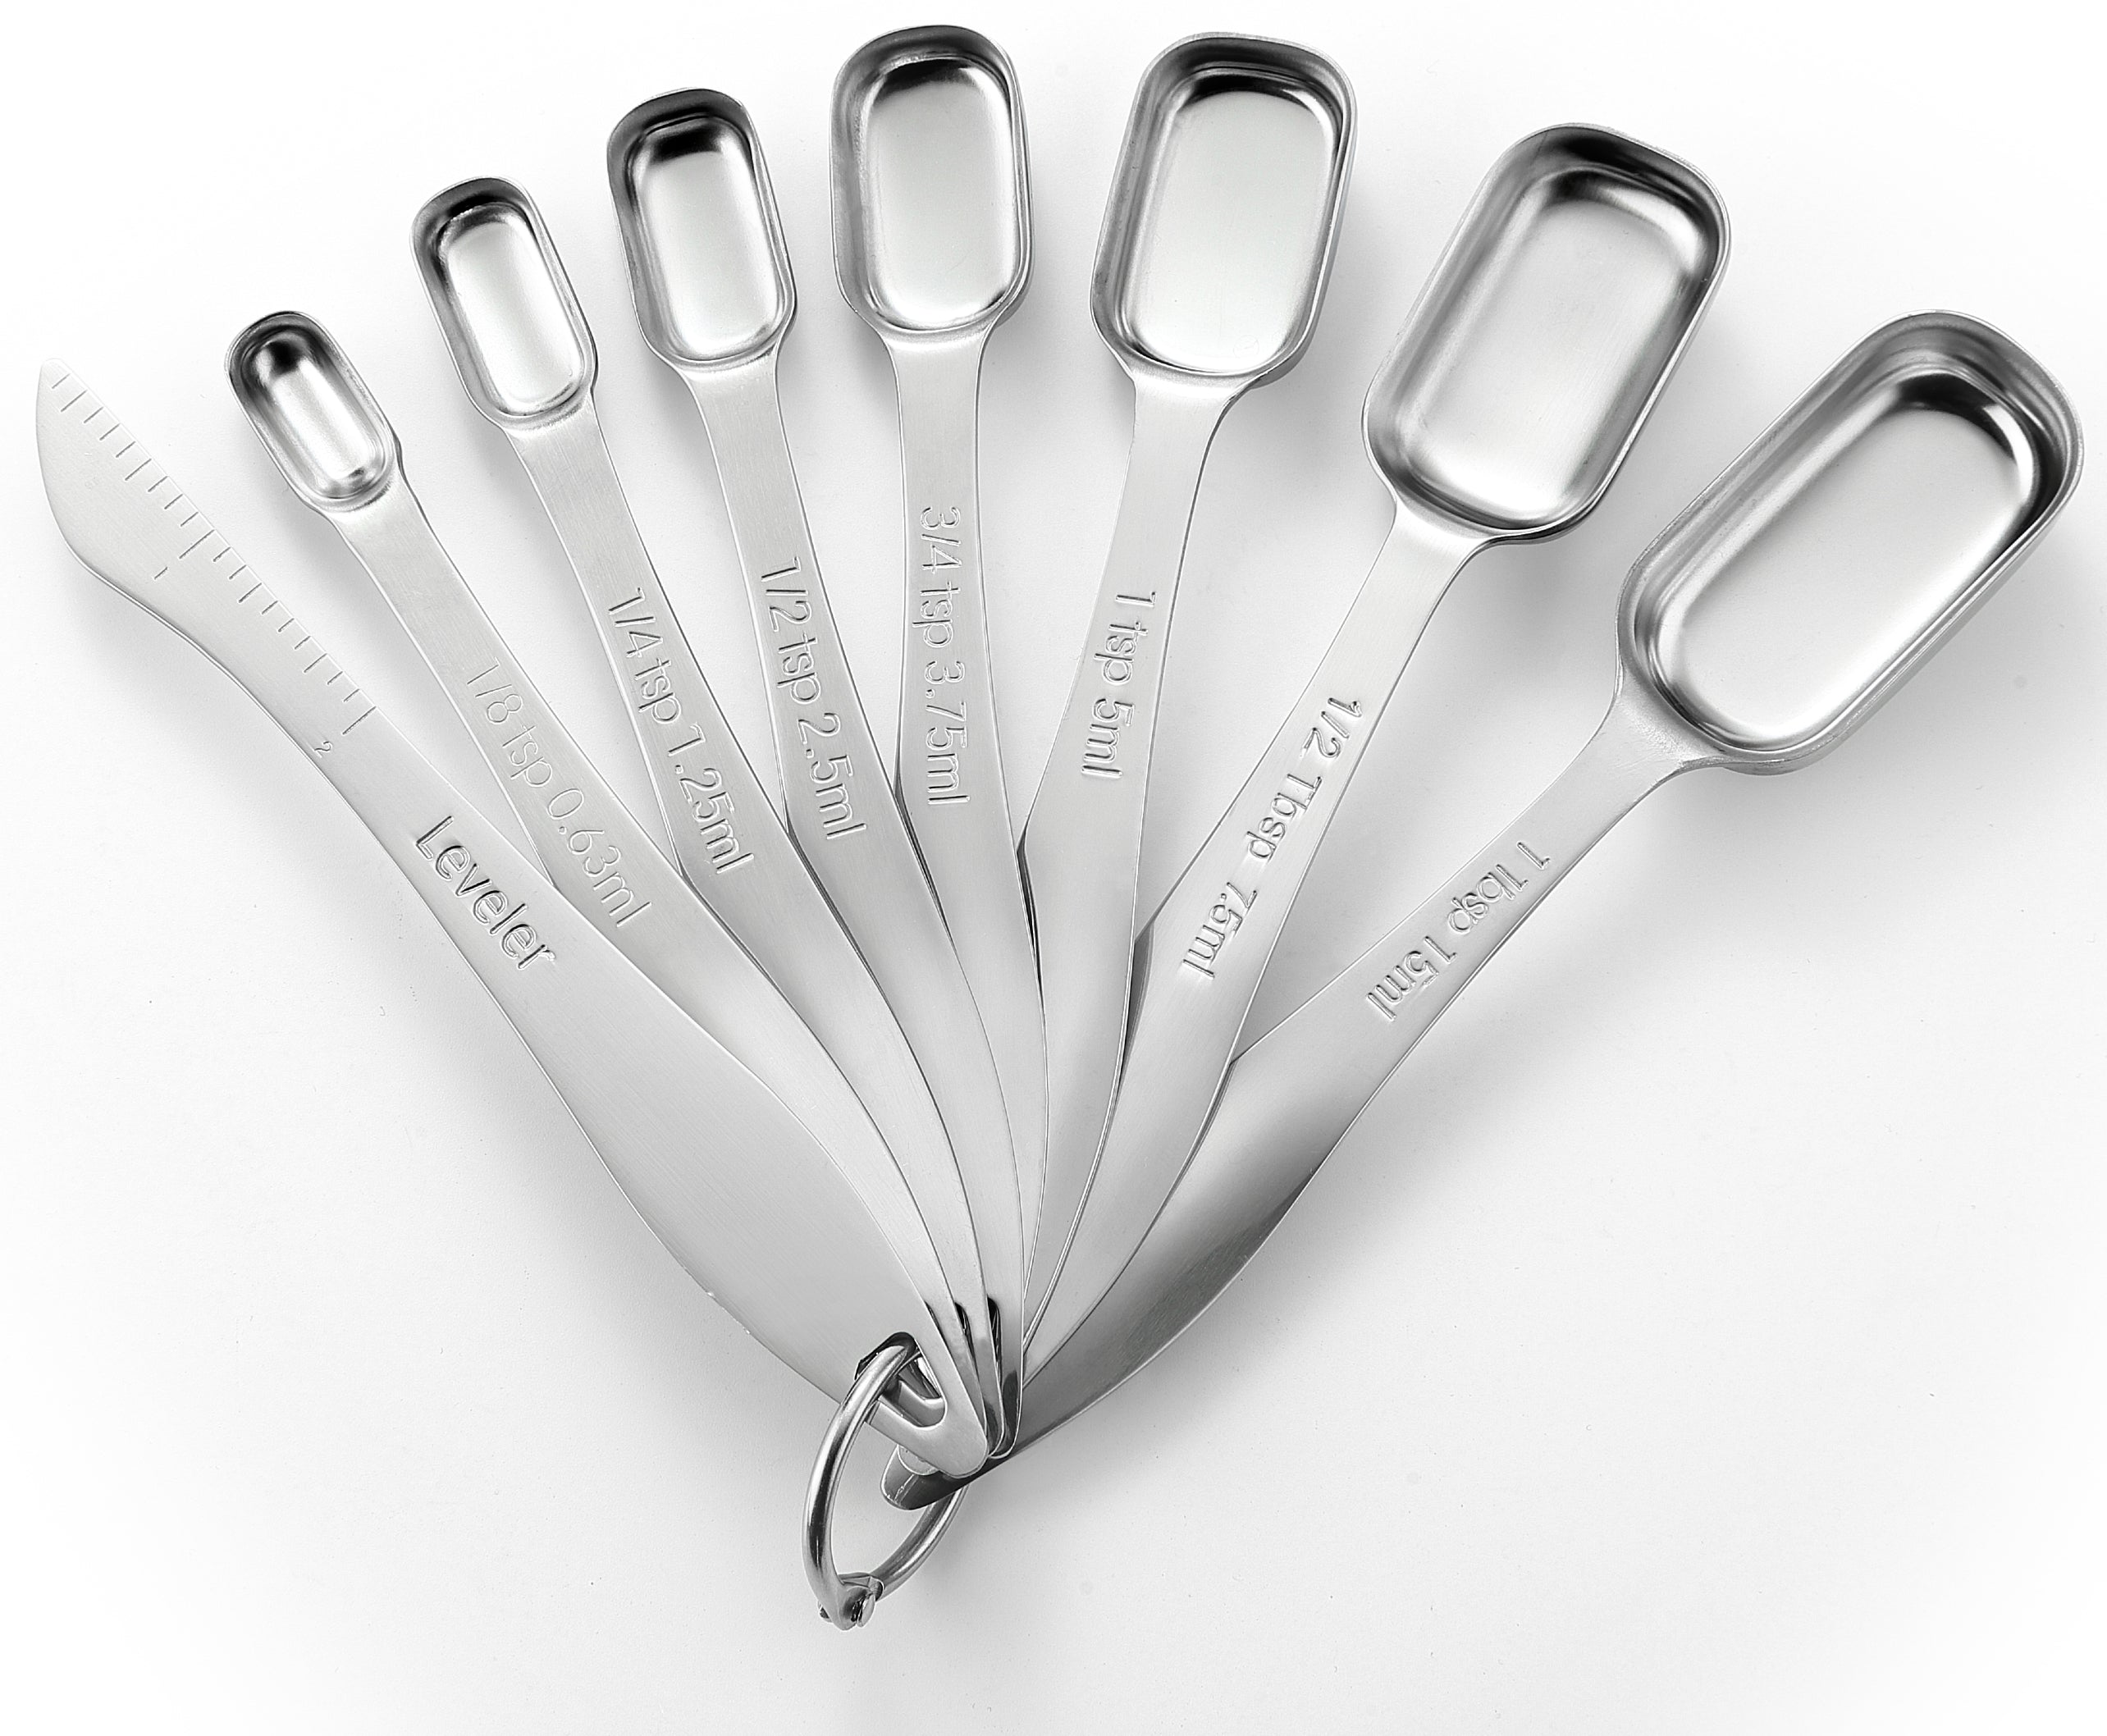 NutriChef Silver 6-Piece Magnetic Measuring Spoon Set, Pro Kitchen Spoons, Ideal for Dry Powders & Wet Ingredients, Metallic Finish